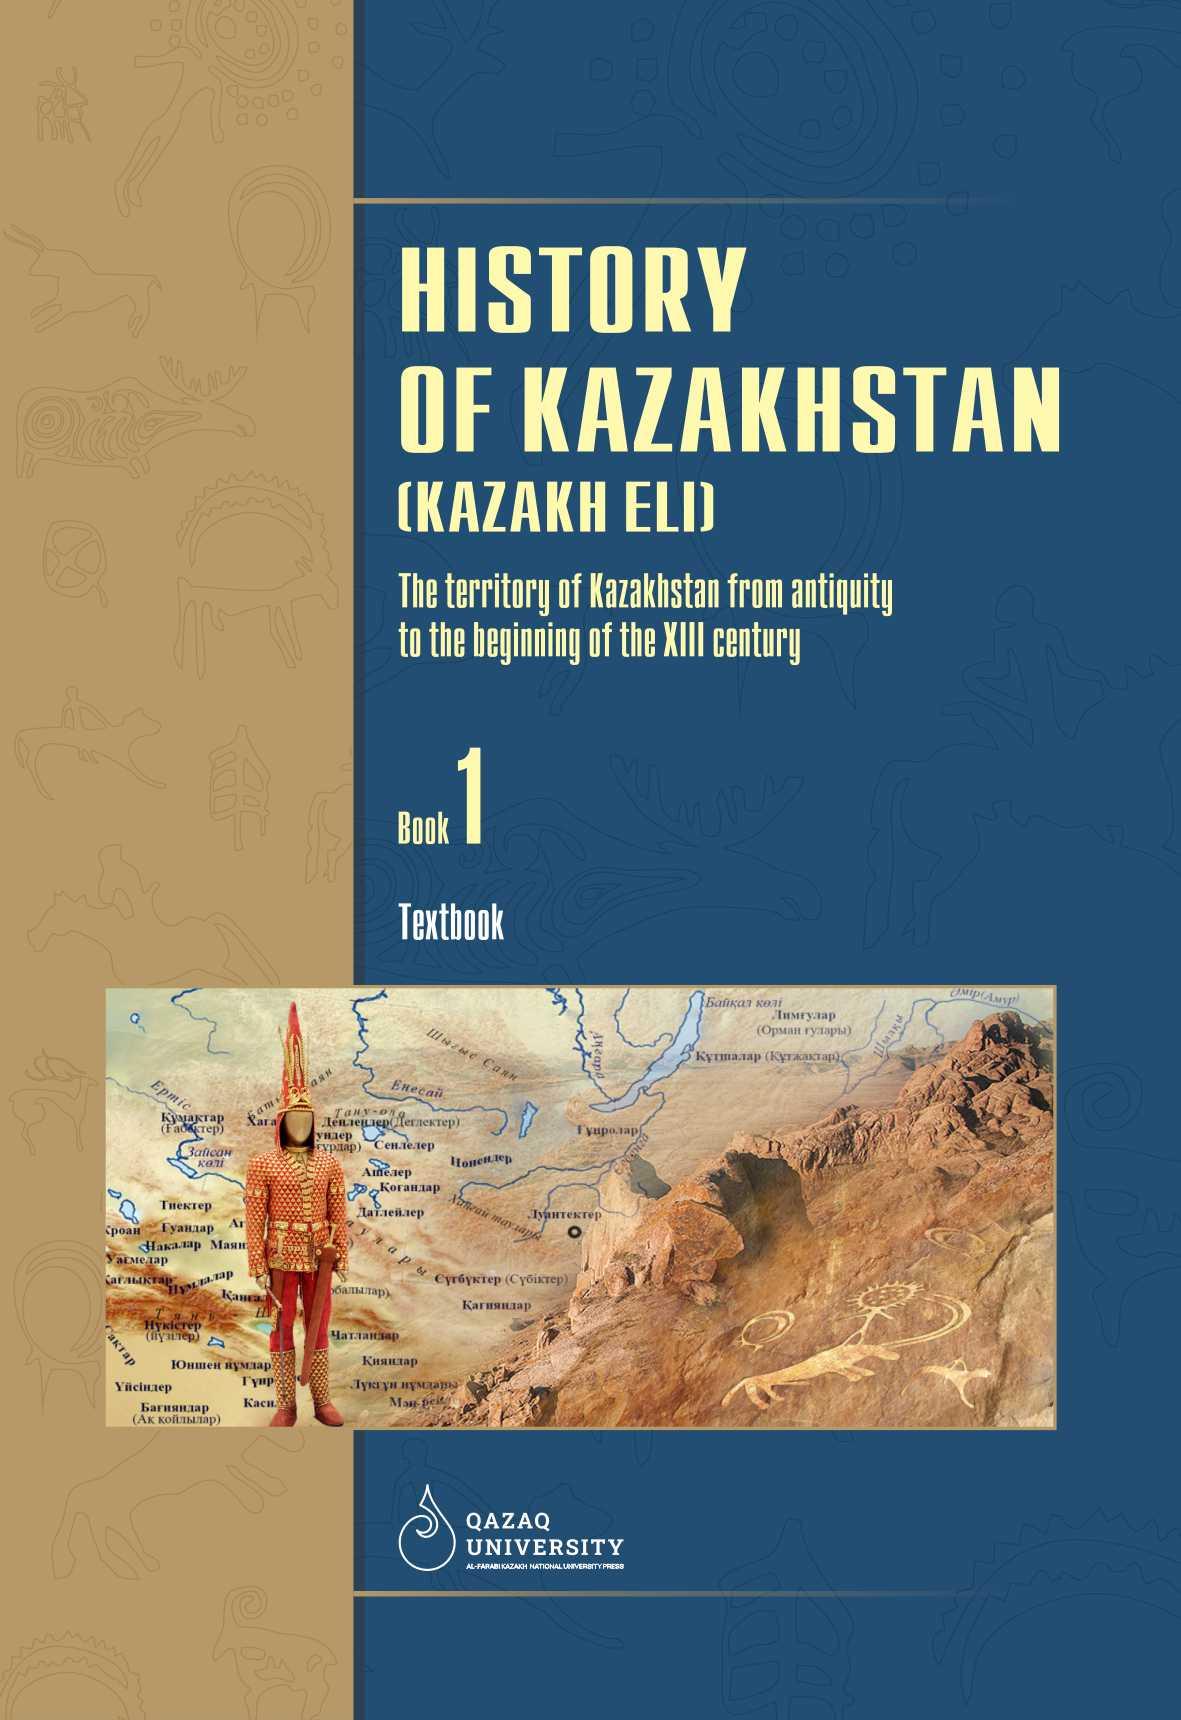 History of Kazakhstan (Kazakh Eli): a manual of 4 books. Book 1: The territory of Kazakhstan from antiquity to the beginning of the XIII century – 286 p.